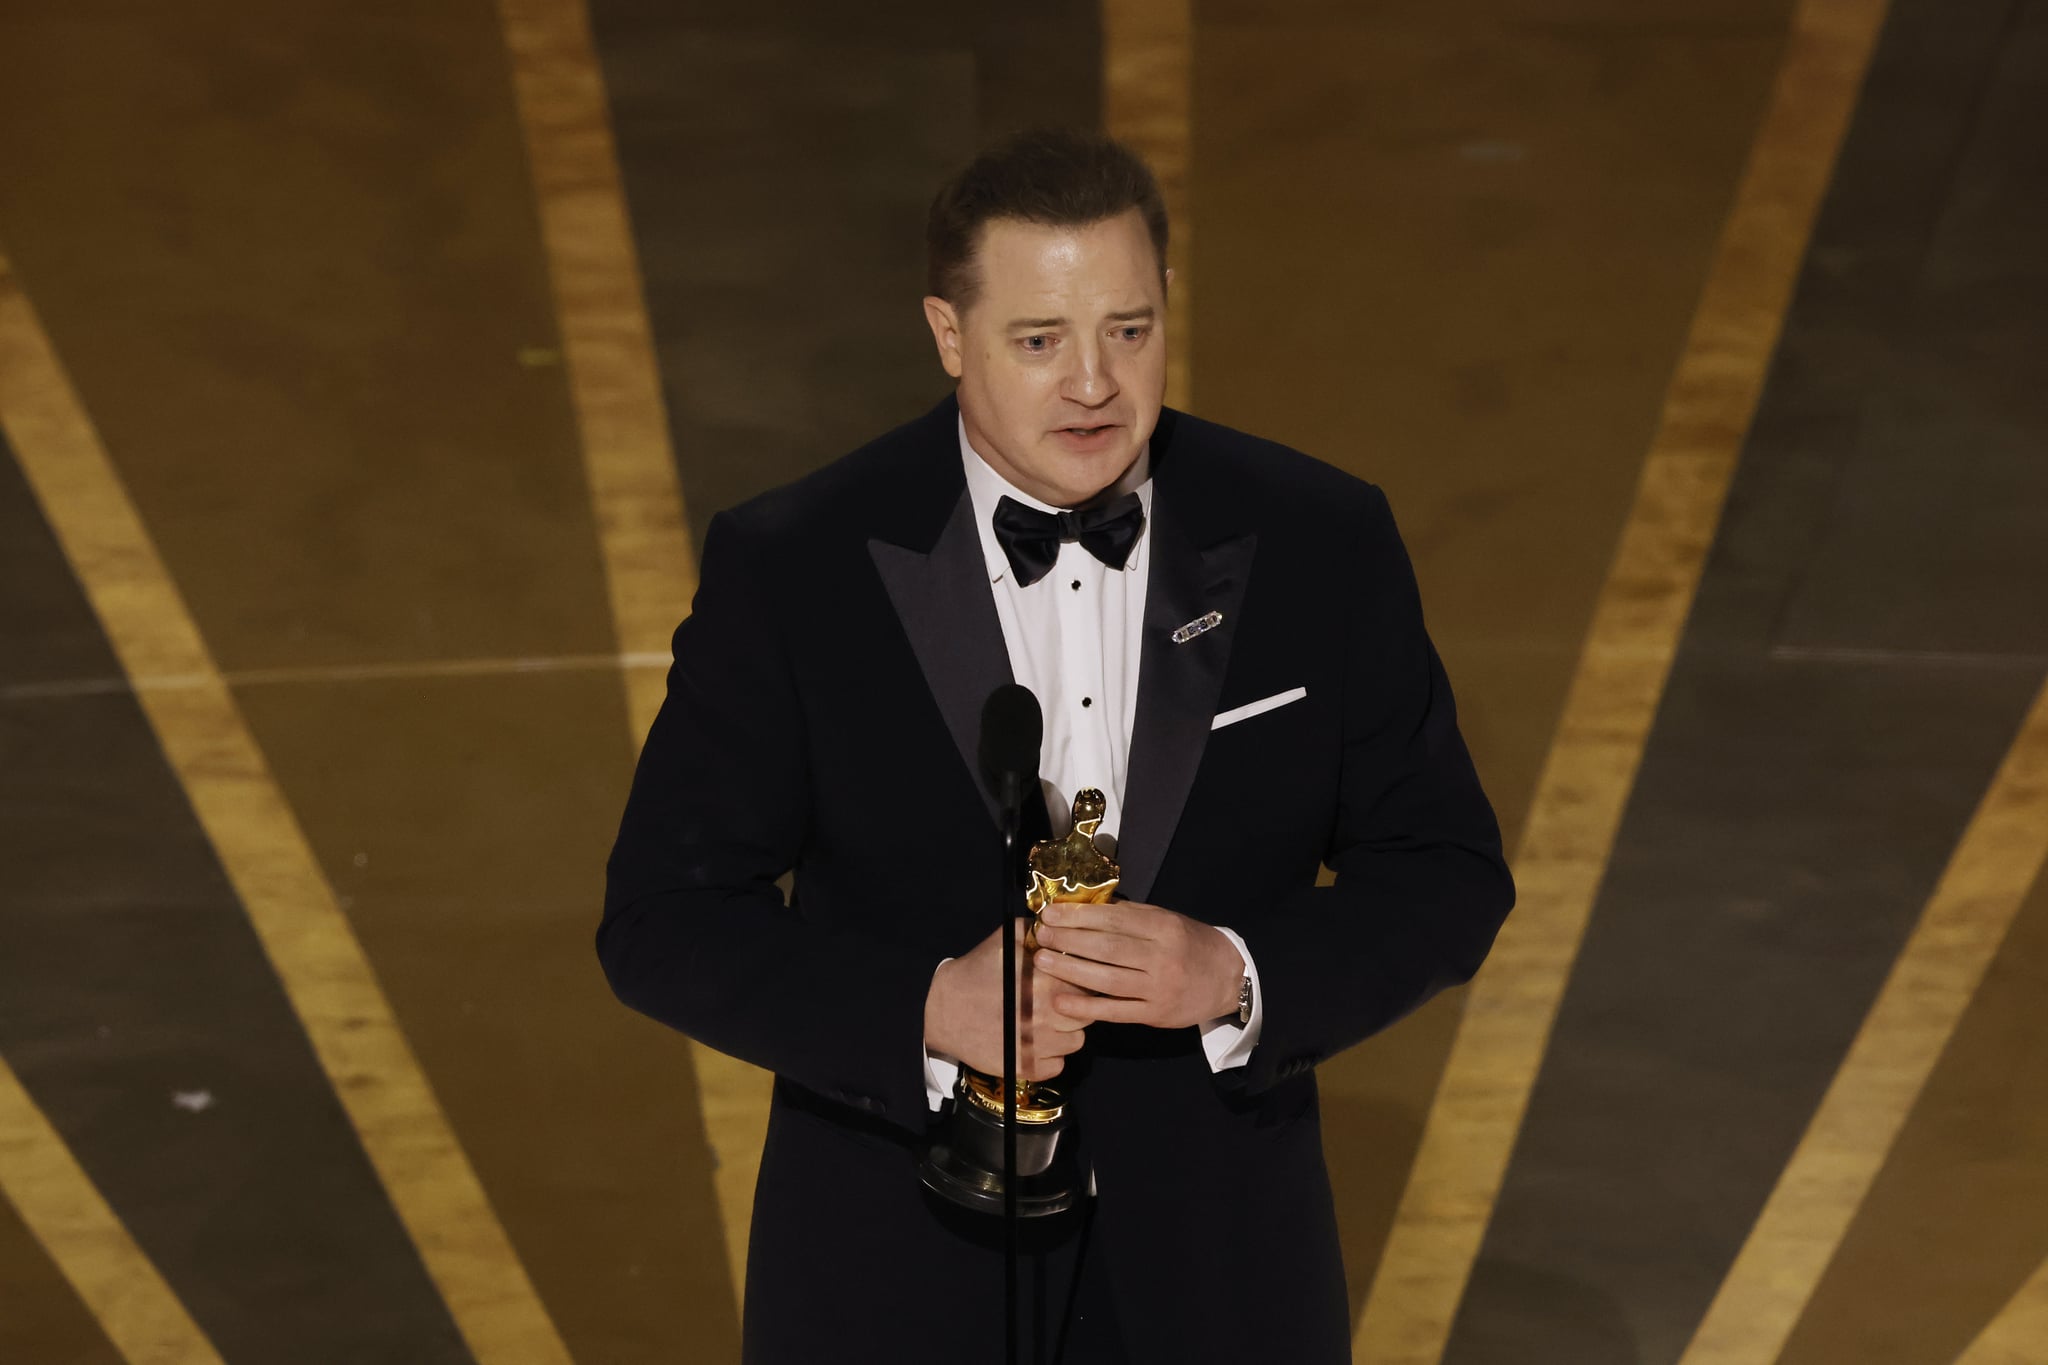 HOLLYWOOD, CALIFORNIA - MARCH 12: Brendan Fraser accepts the Best Actor award for 